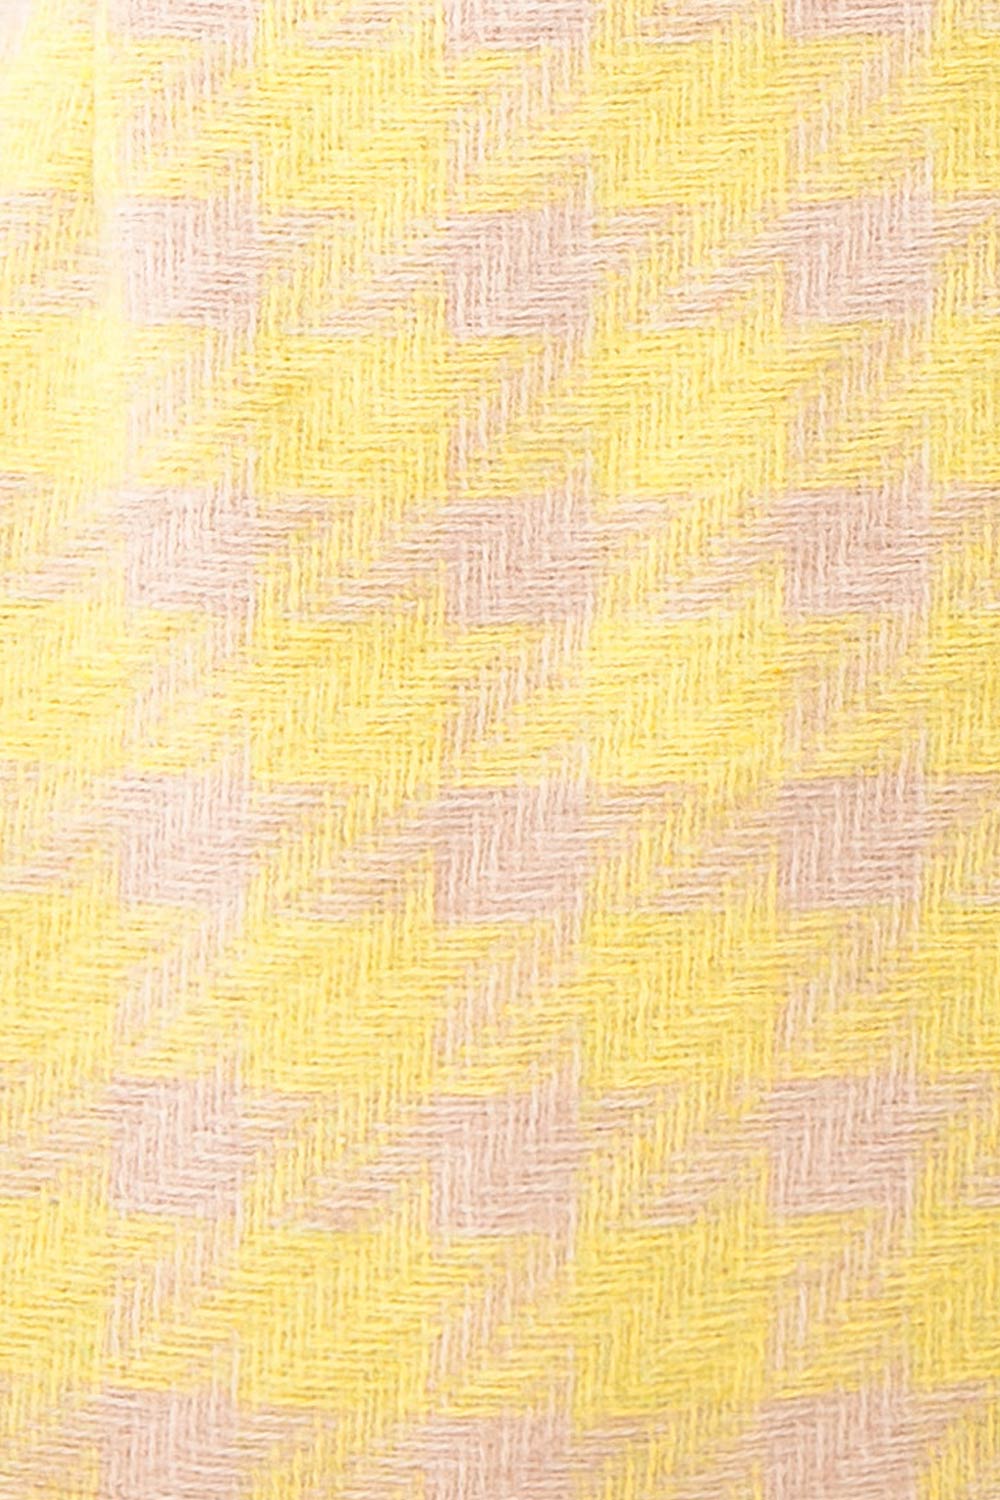 Set Lanajane Yellow Houndstooth Cropped Blazer and Skirt | Boutique 1861 fabric